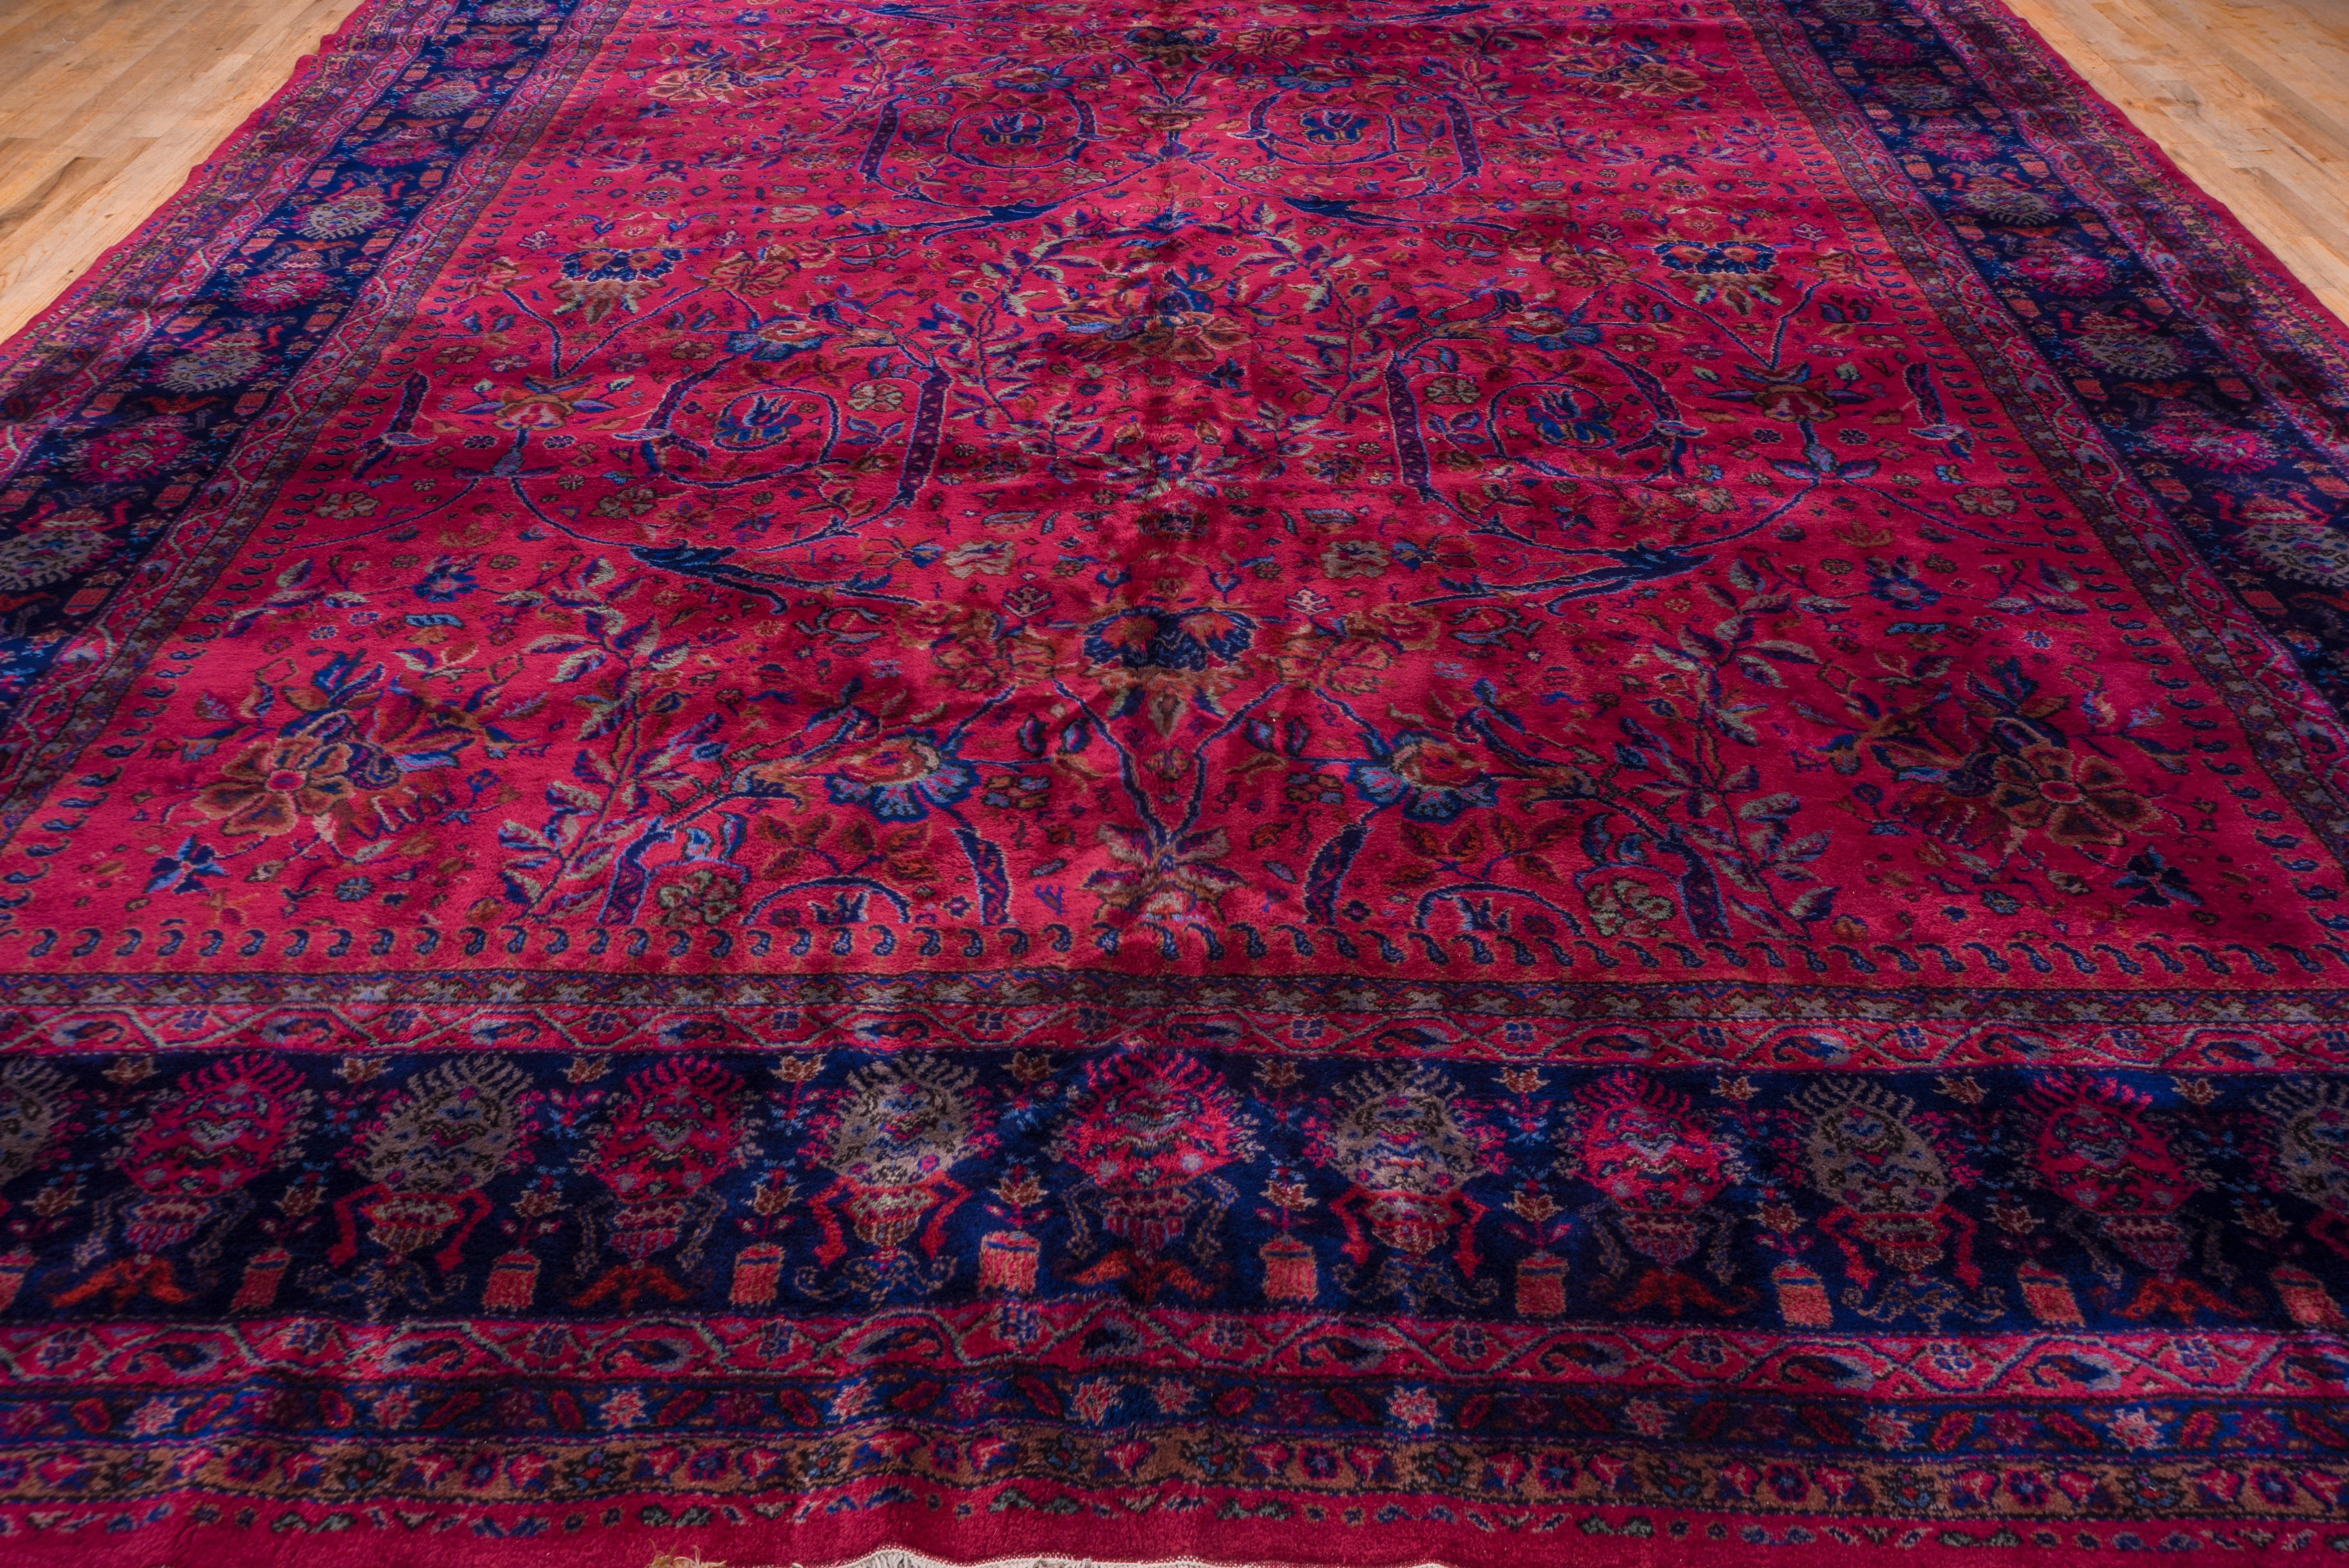 Hand-Knotted Turkish Sparta Mansion Carpet, Berry Colored Field, American Sarouk Inspired For Sale